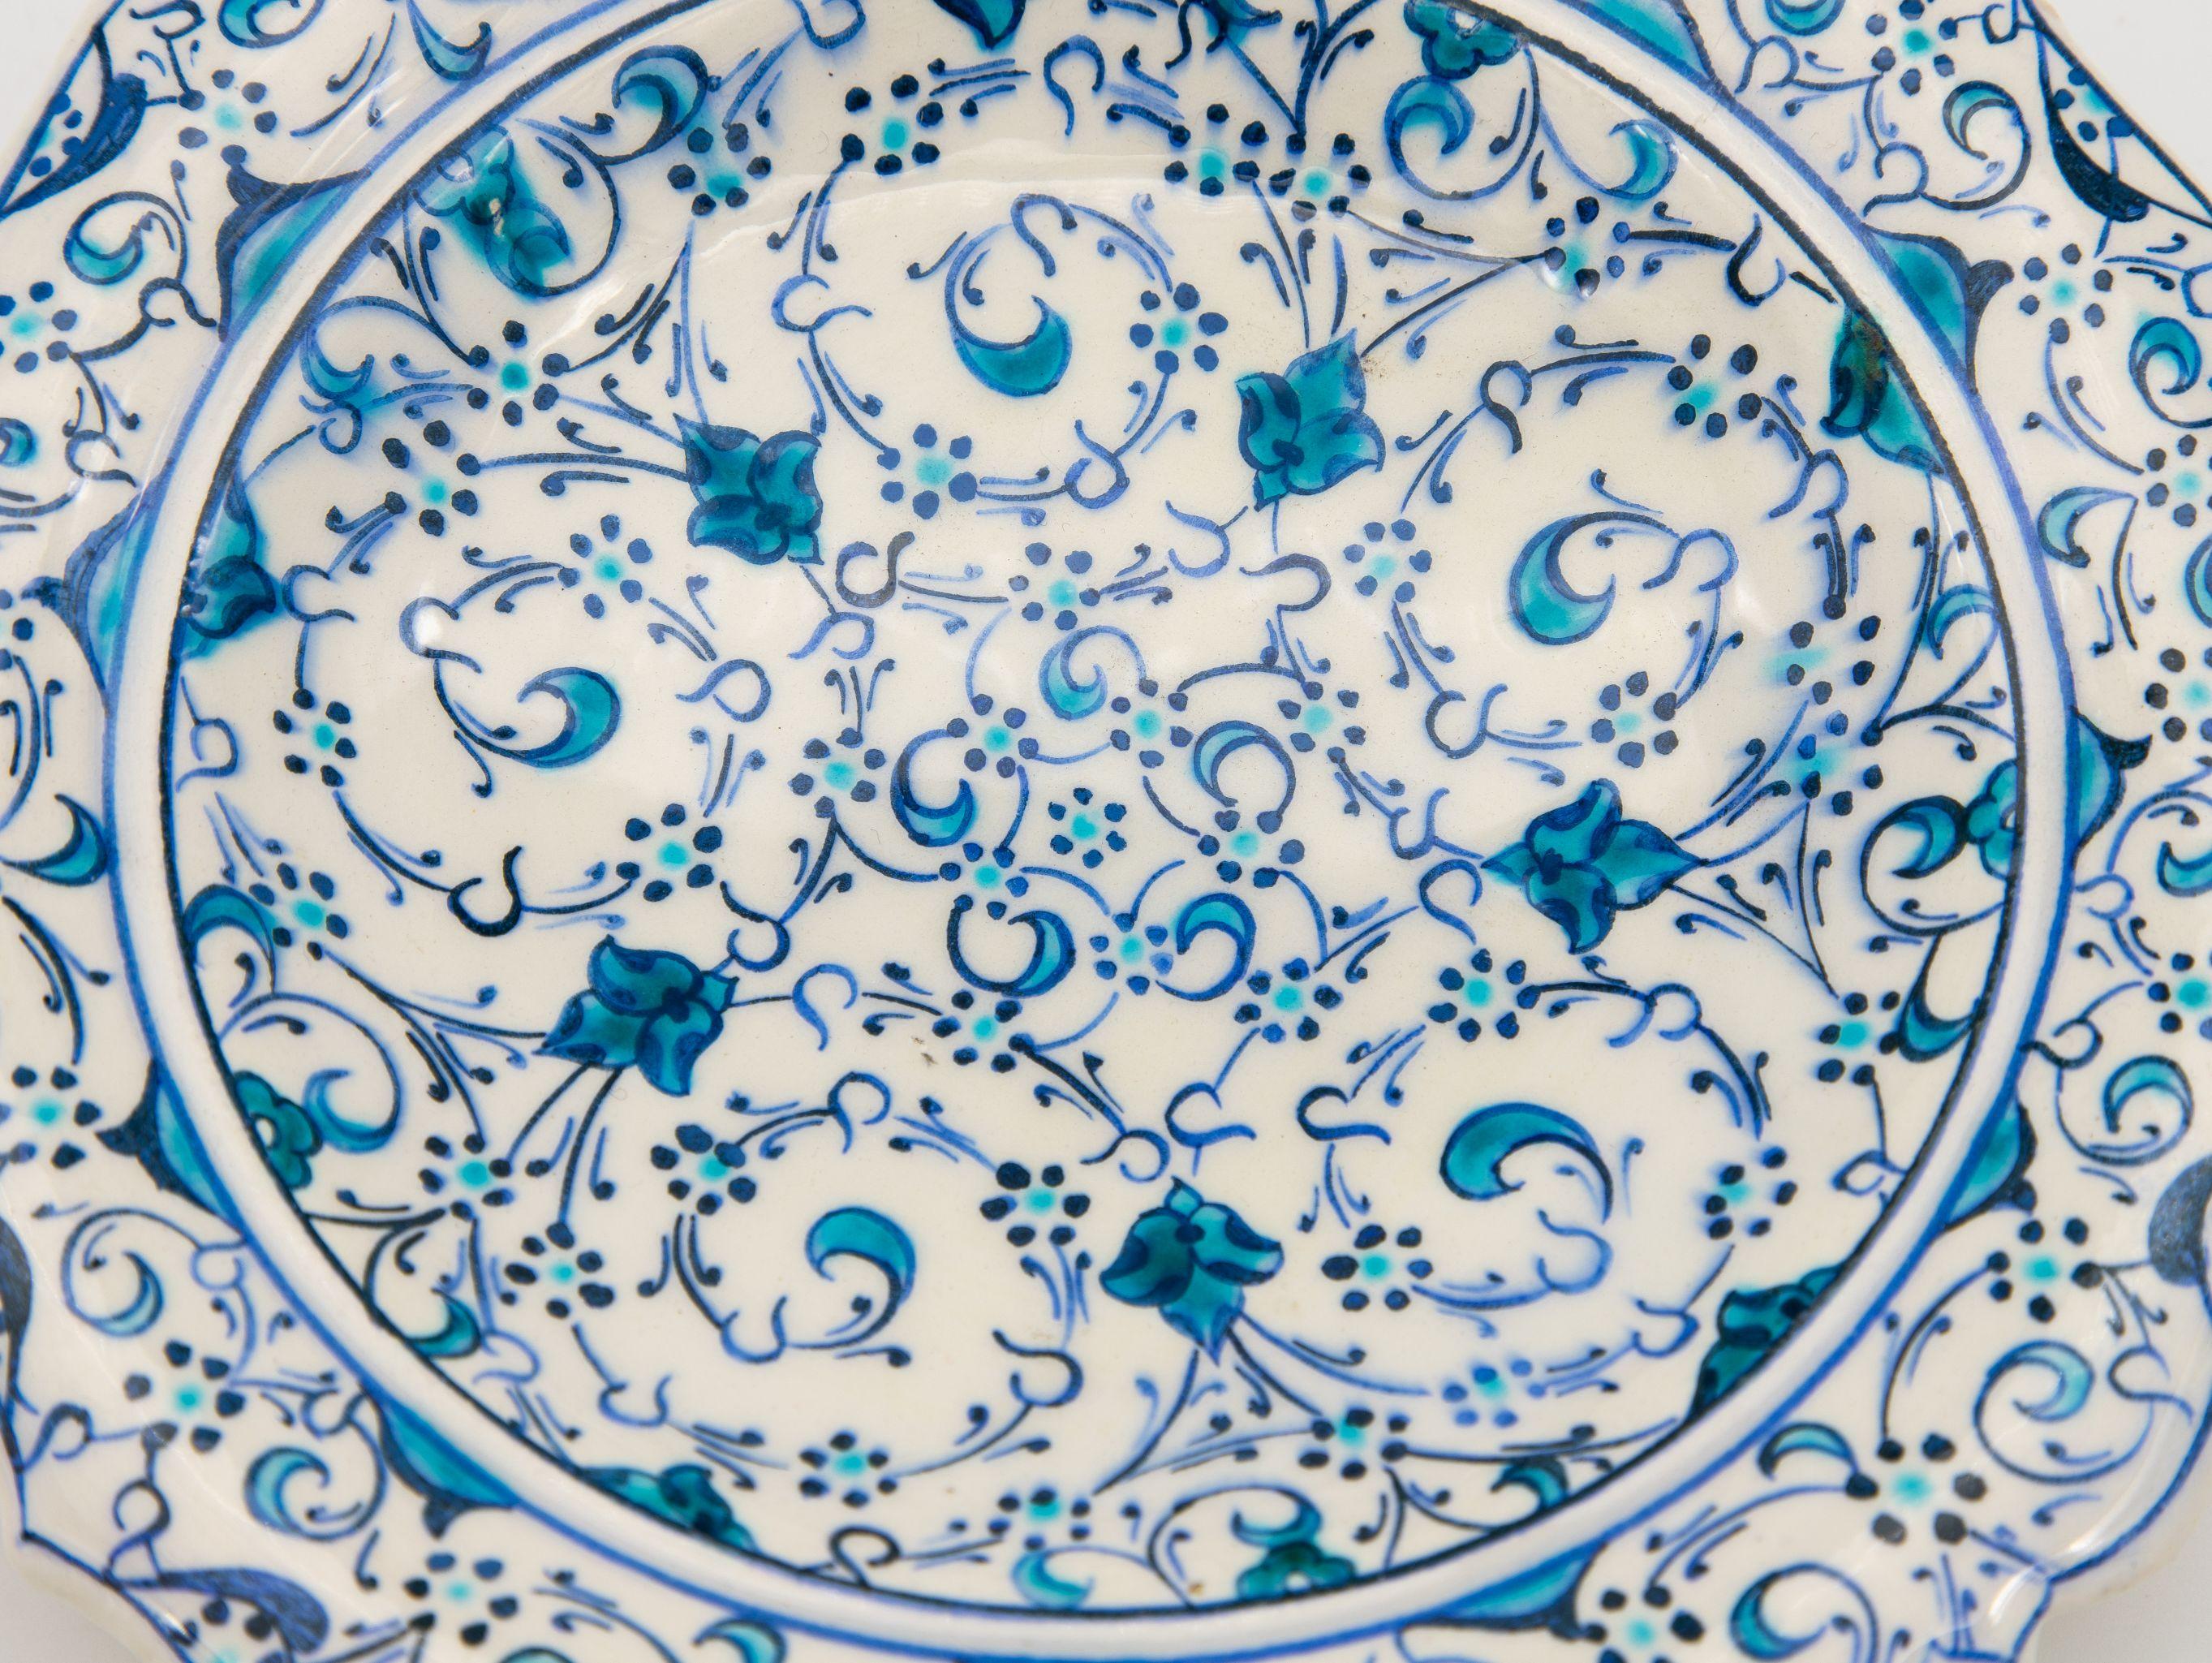 A stunning small Iznik plate in a piecrust shape. This beautiful example of early 20th century Iznik pottery features the iconic cobalt and turquoise colors on white background that this Turkish style of pottery is known for. There is repeating